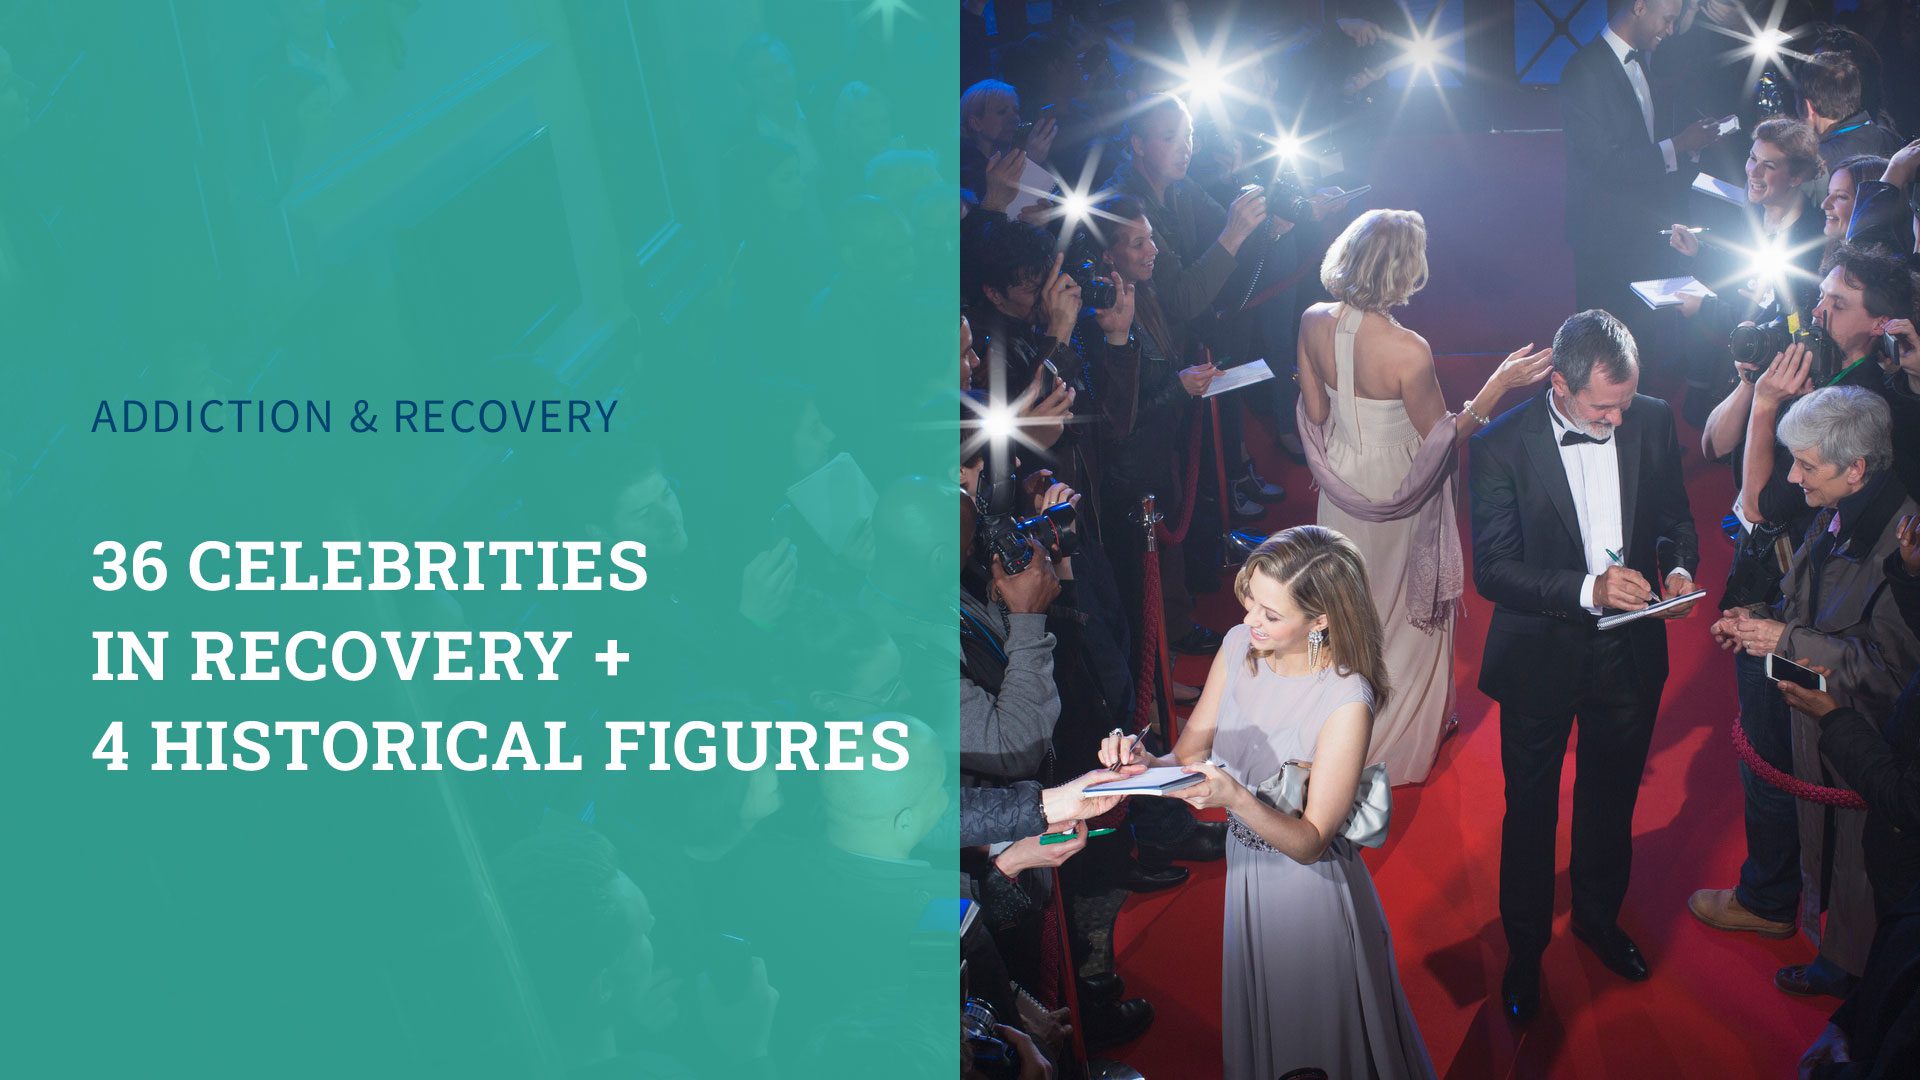 The List: 36 Celebrities in Recovery + 4 Historical Figures